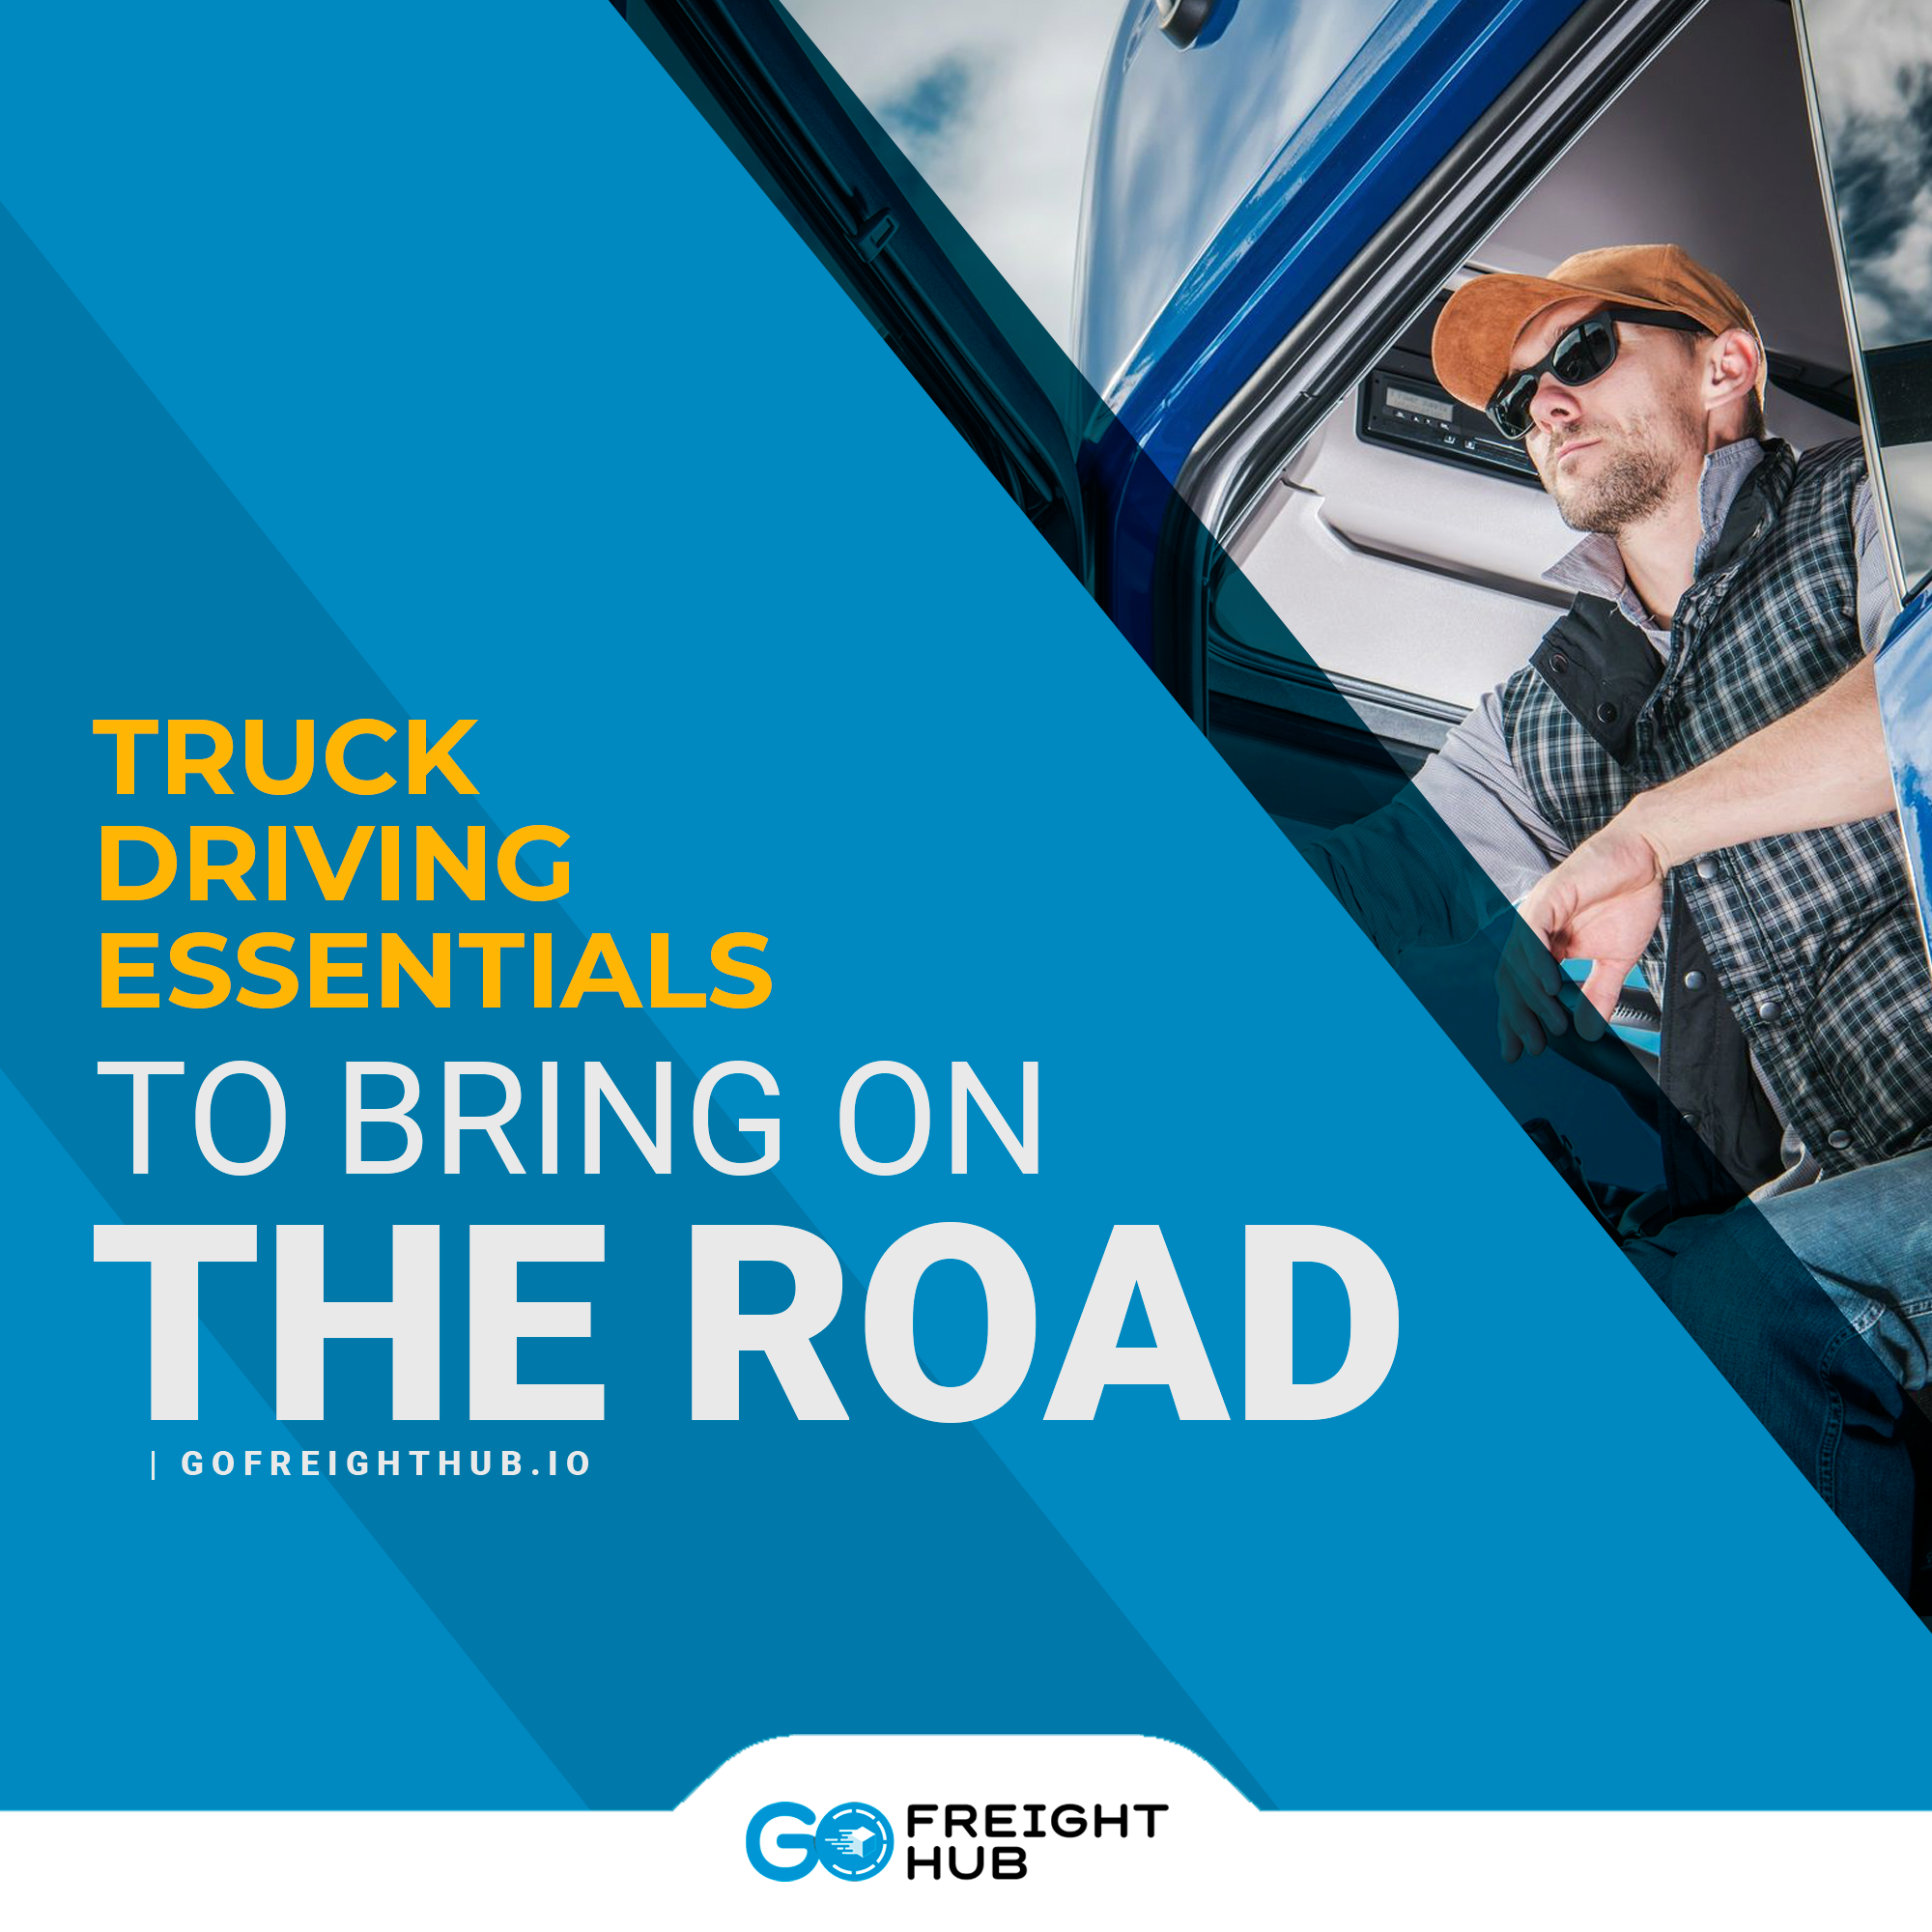 32 TRUCK DRIVING ESSENTIALS TO BRING ON THE ROAD - ECTTS - Auto